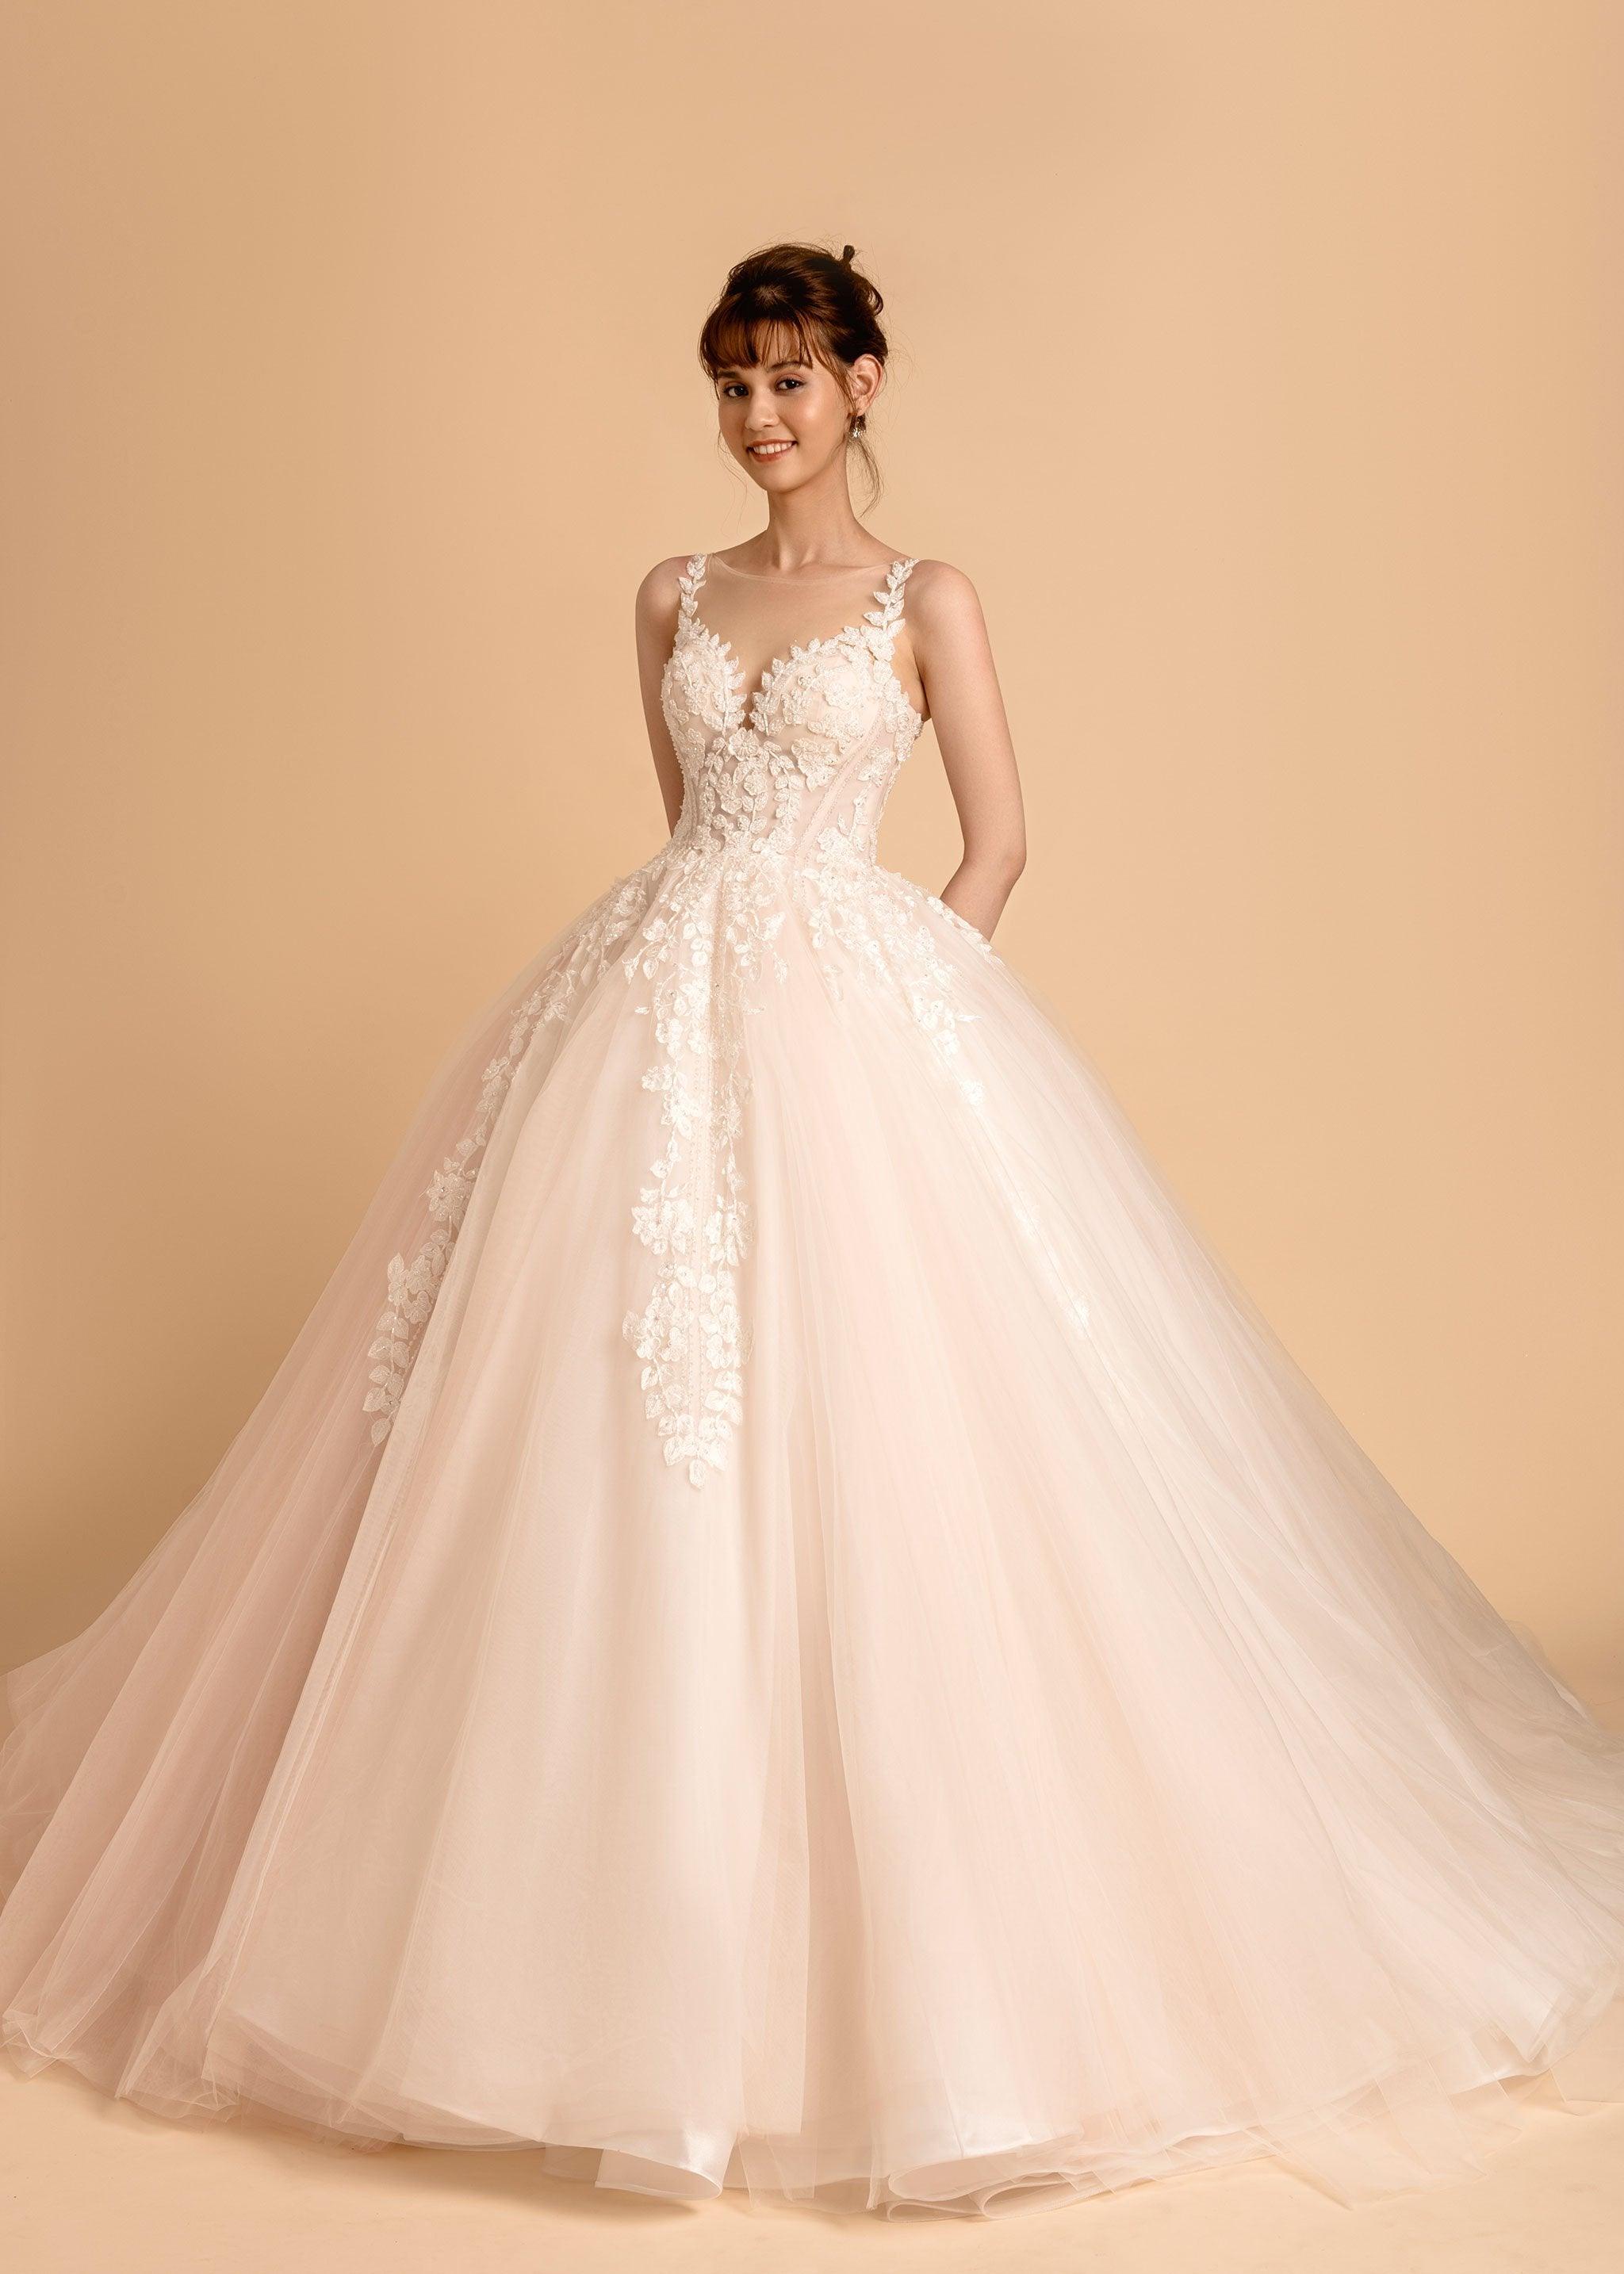 Princess Ball Gown | Sweetheart Neckline Ball Gown | Dare and Dazzle